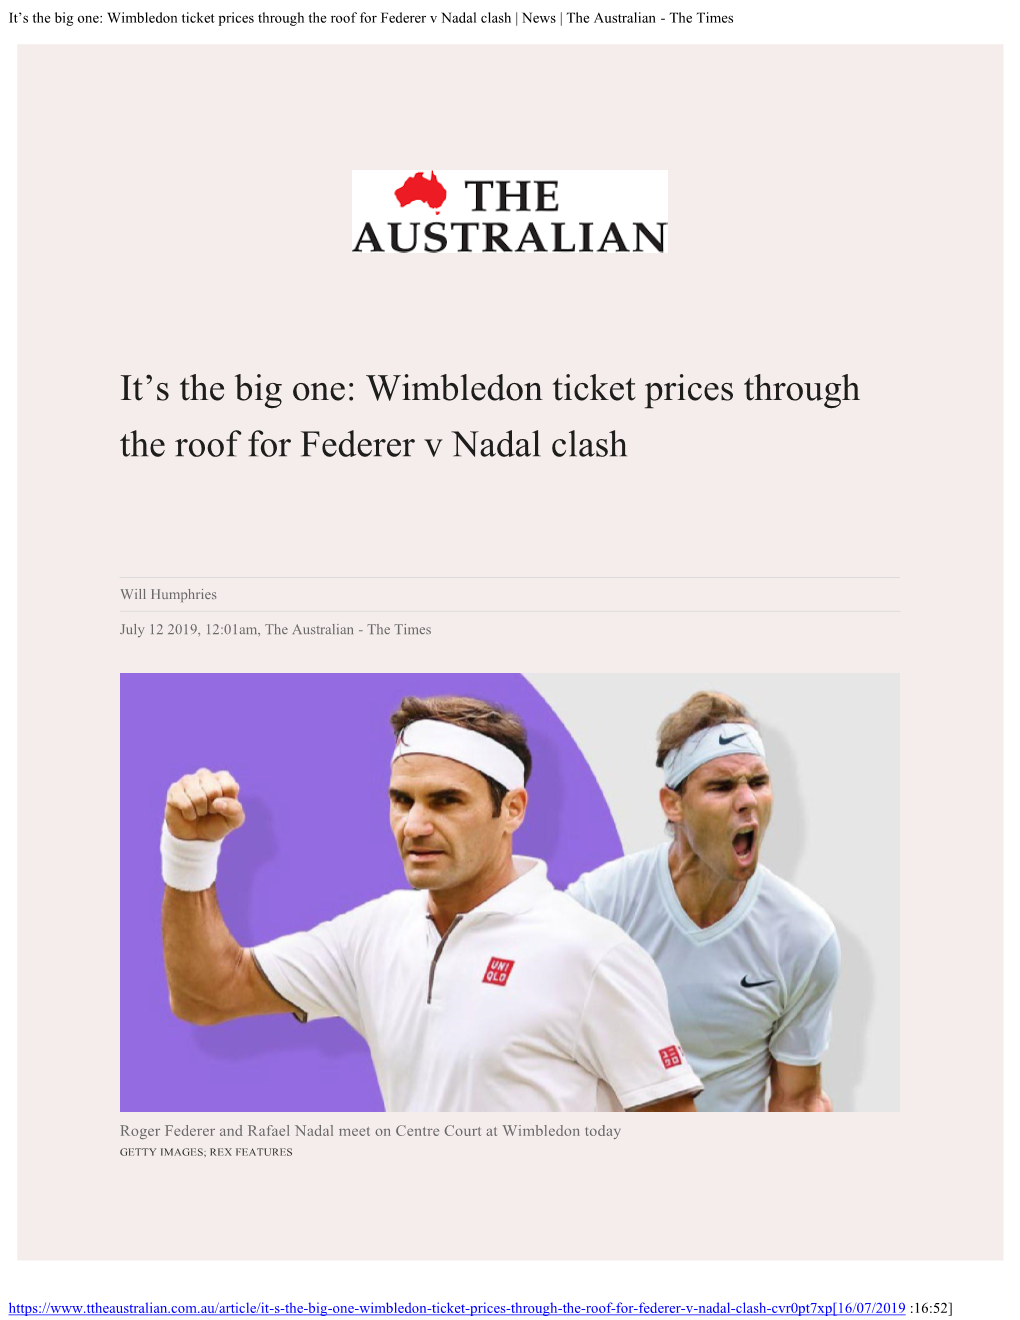 Wimbledon Ticket Prices Through the Roof for Federer V Nadal Clash | News | the Australian - the Times